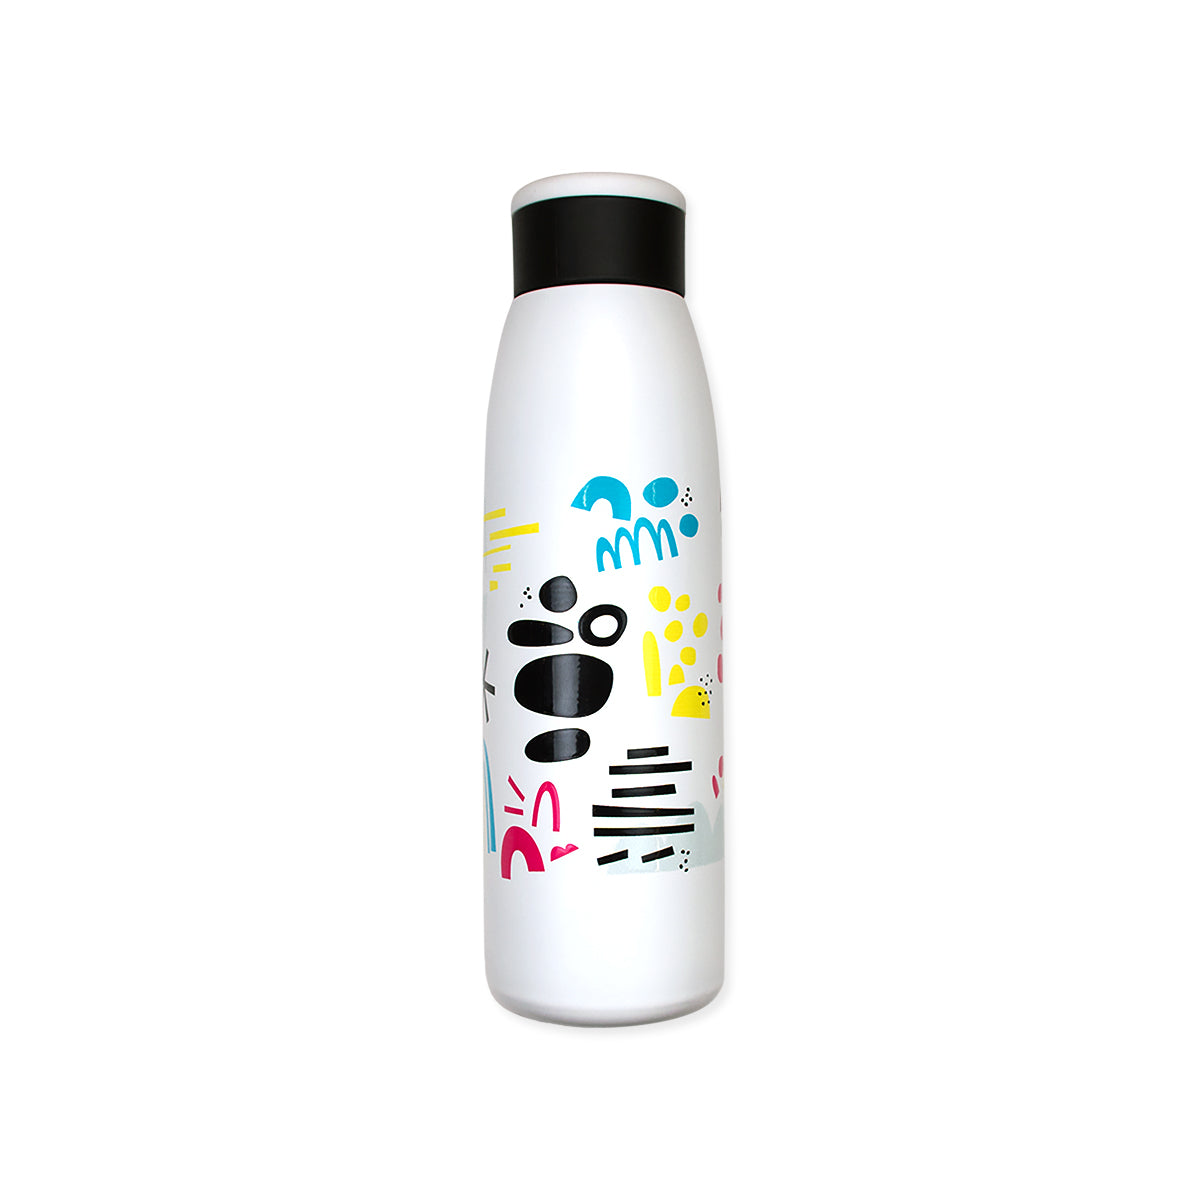 white stainless steel water bottle with a retro-abstract design in cyan, magenta, yellow, black